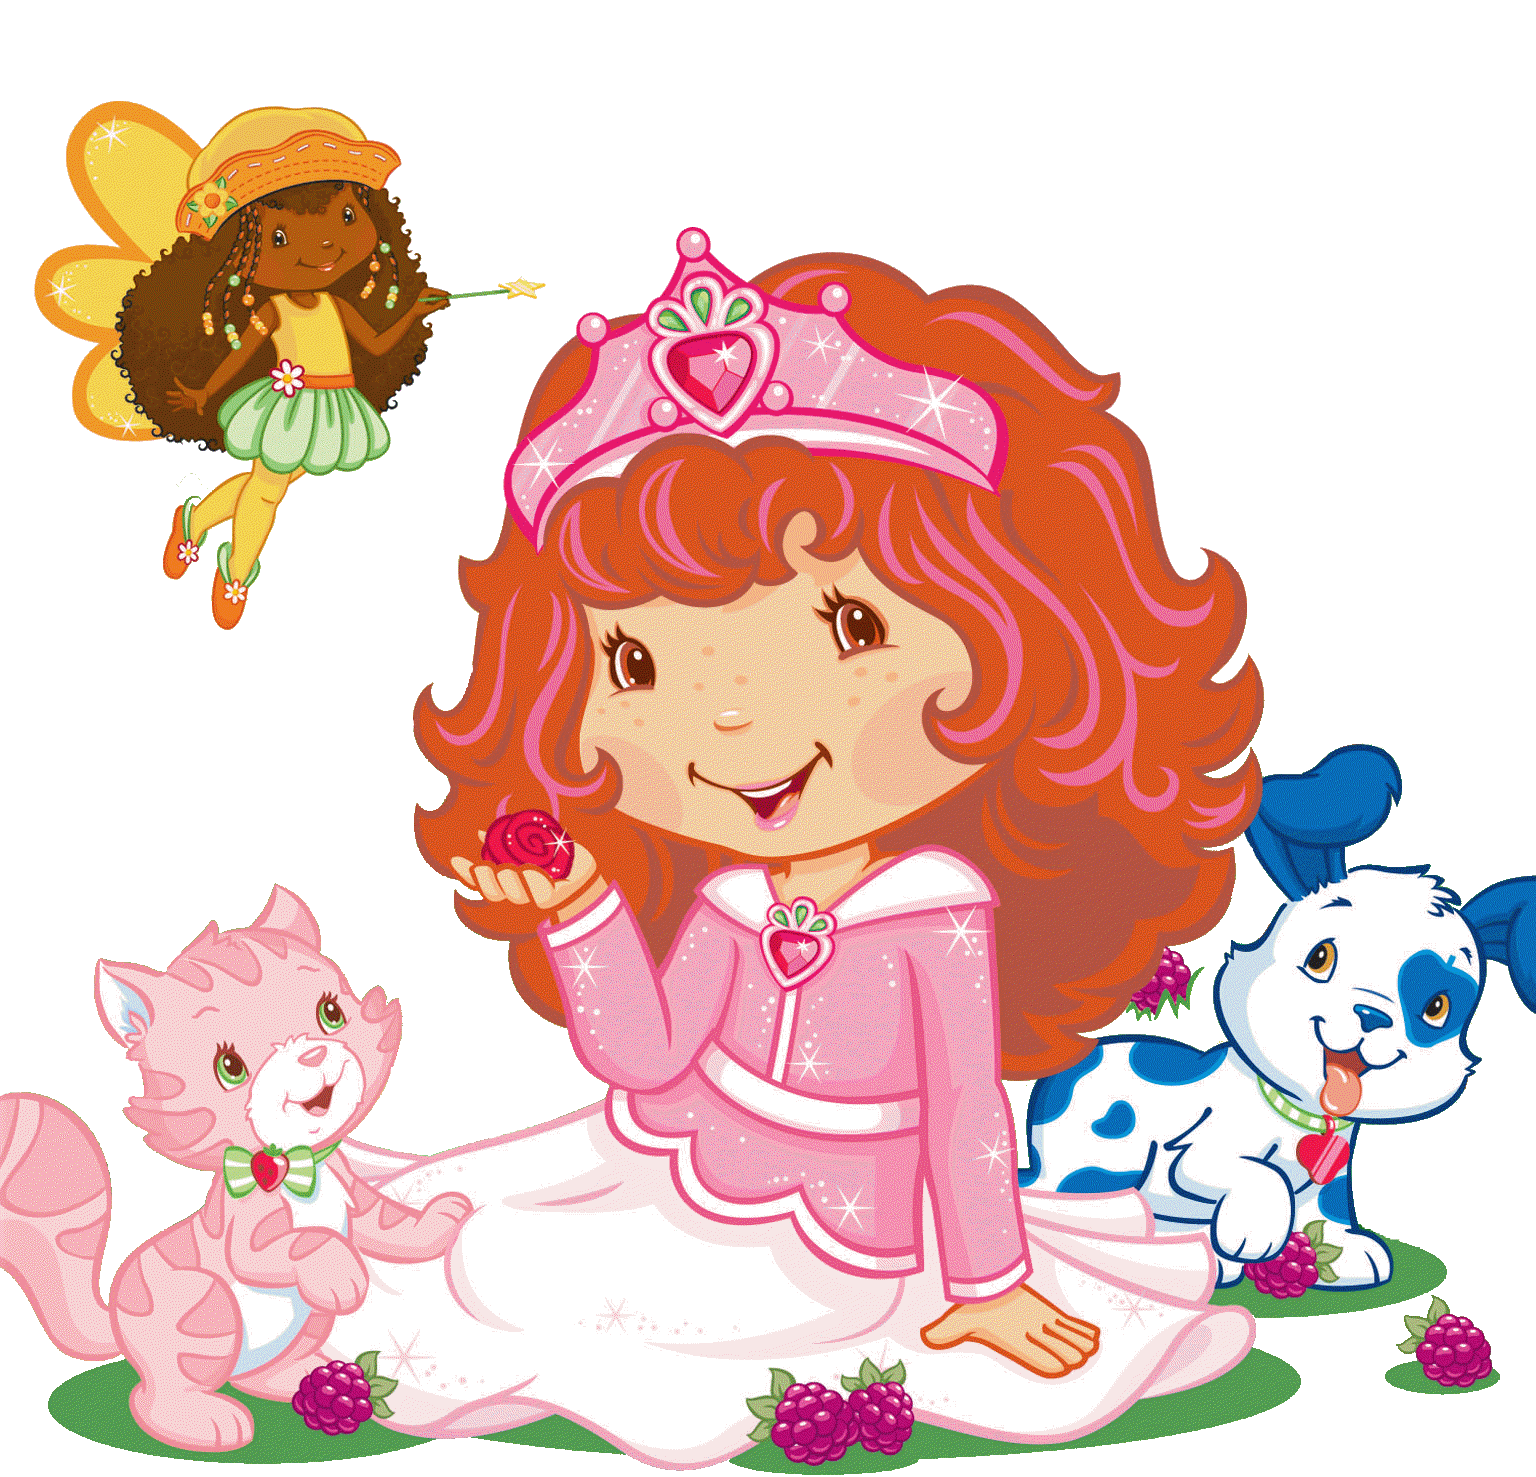 Strawberry shortcake images characters. Strawberries clipart sad